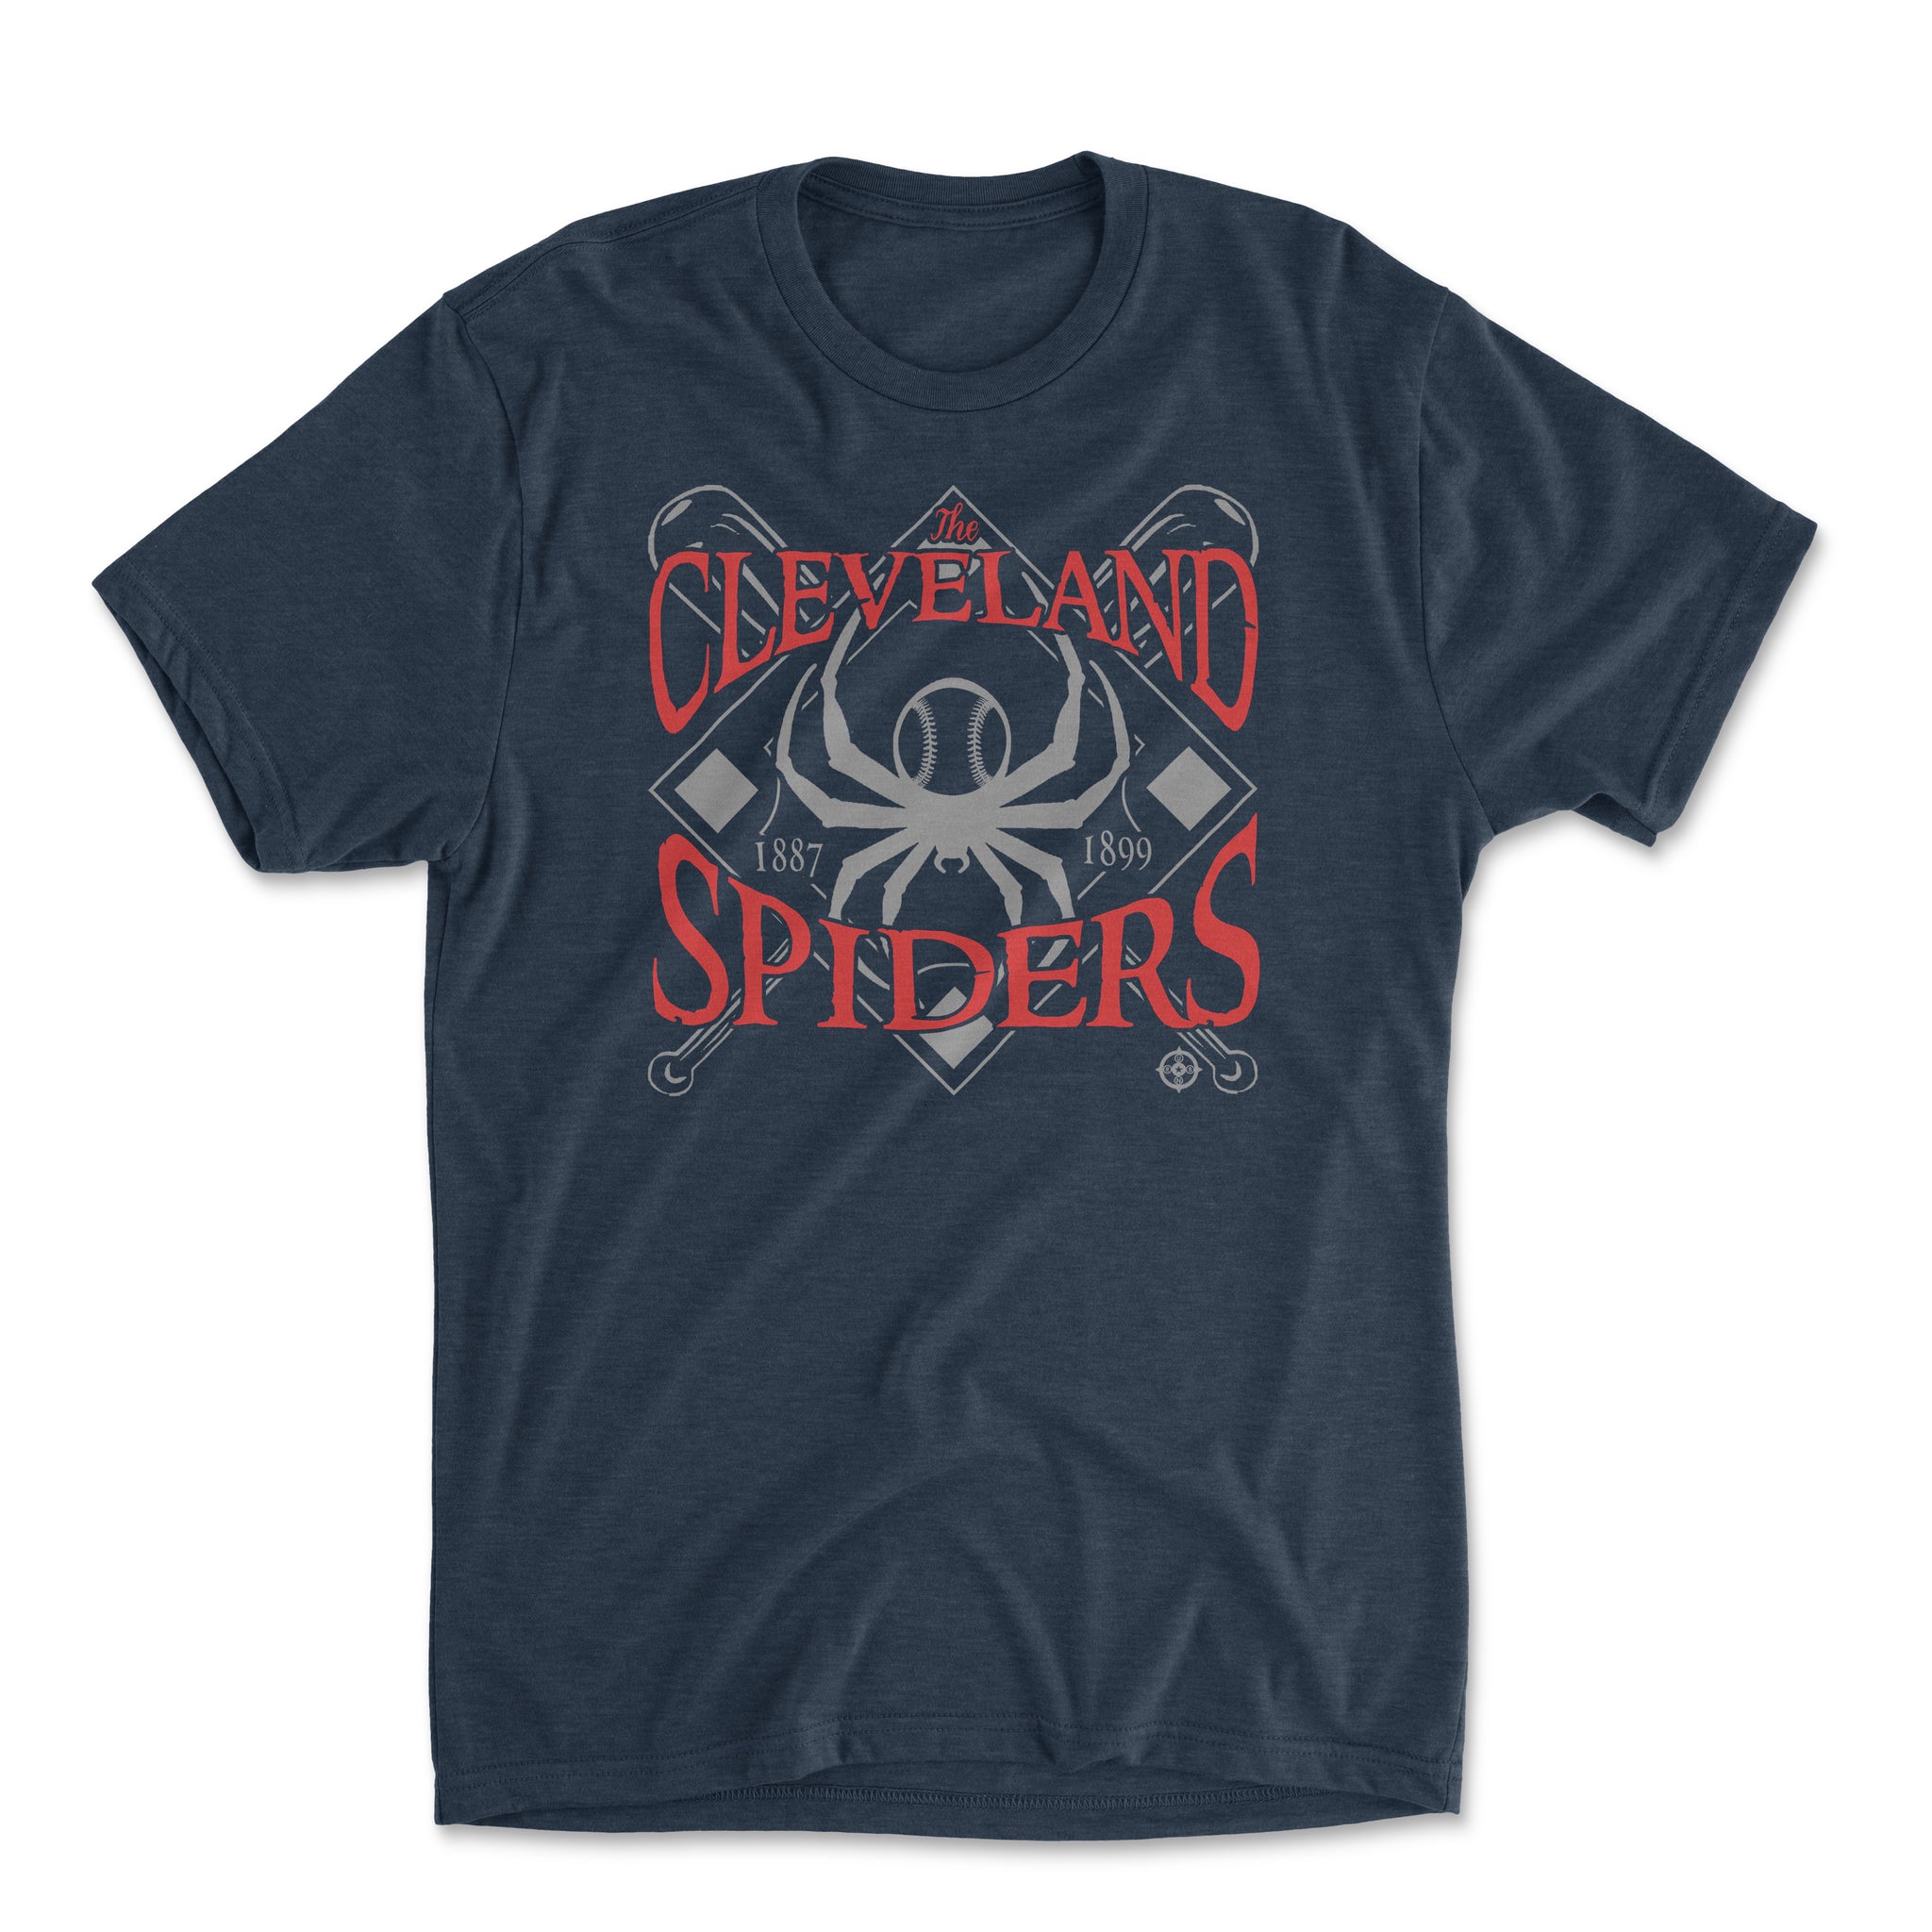 The Cleveland Spiders